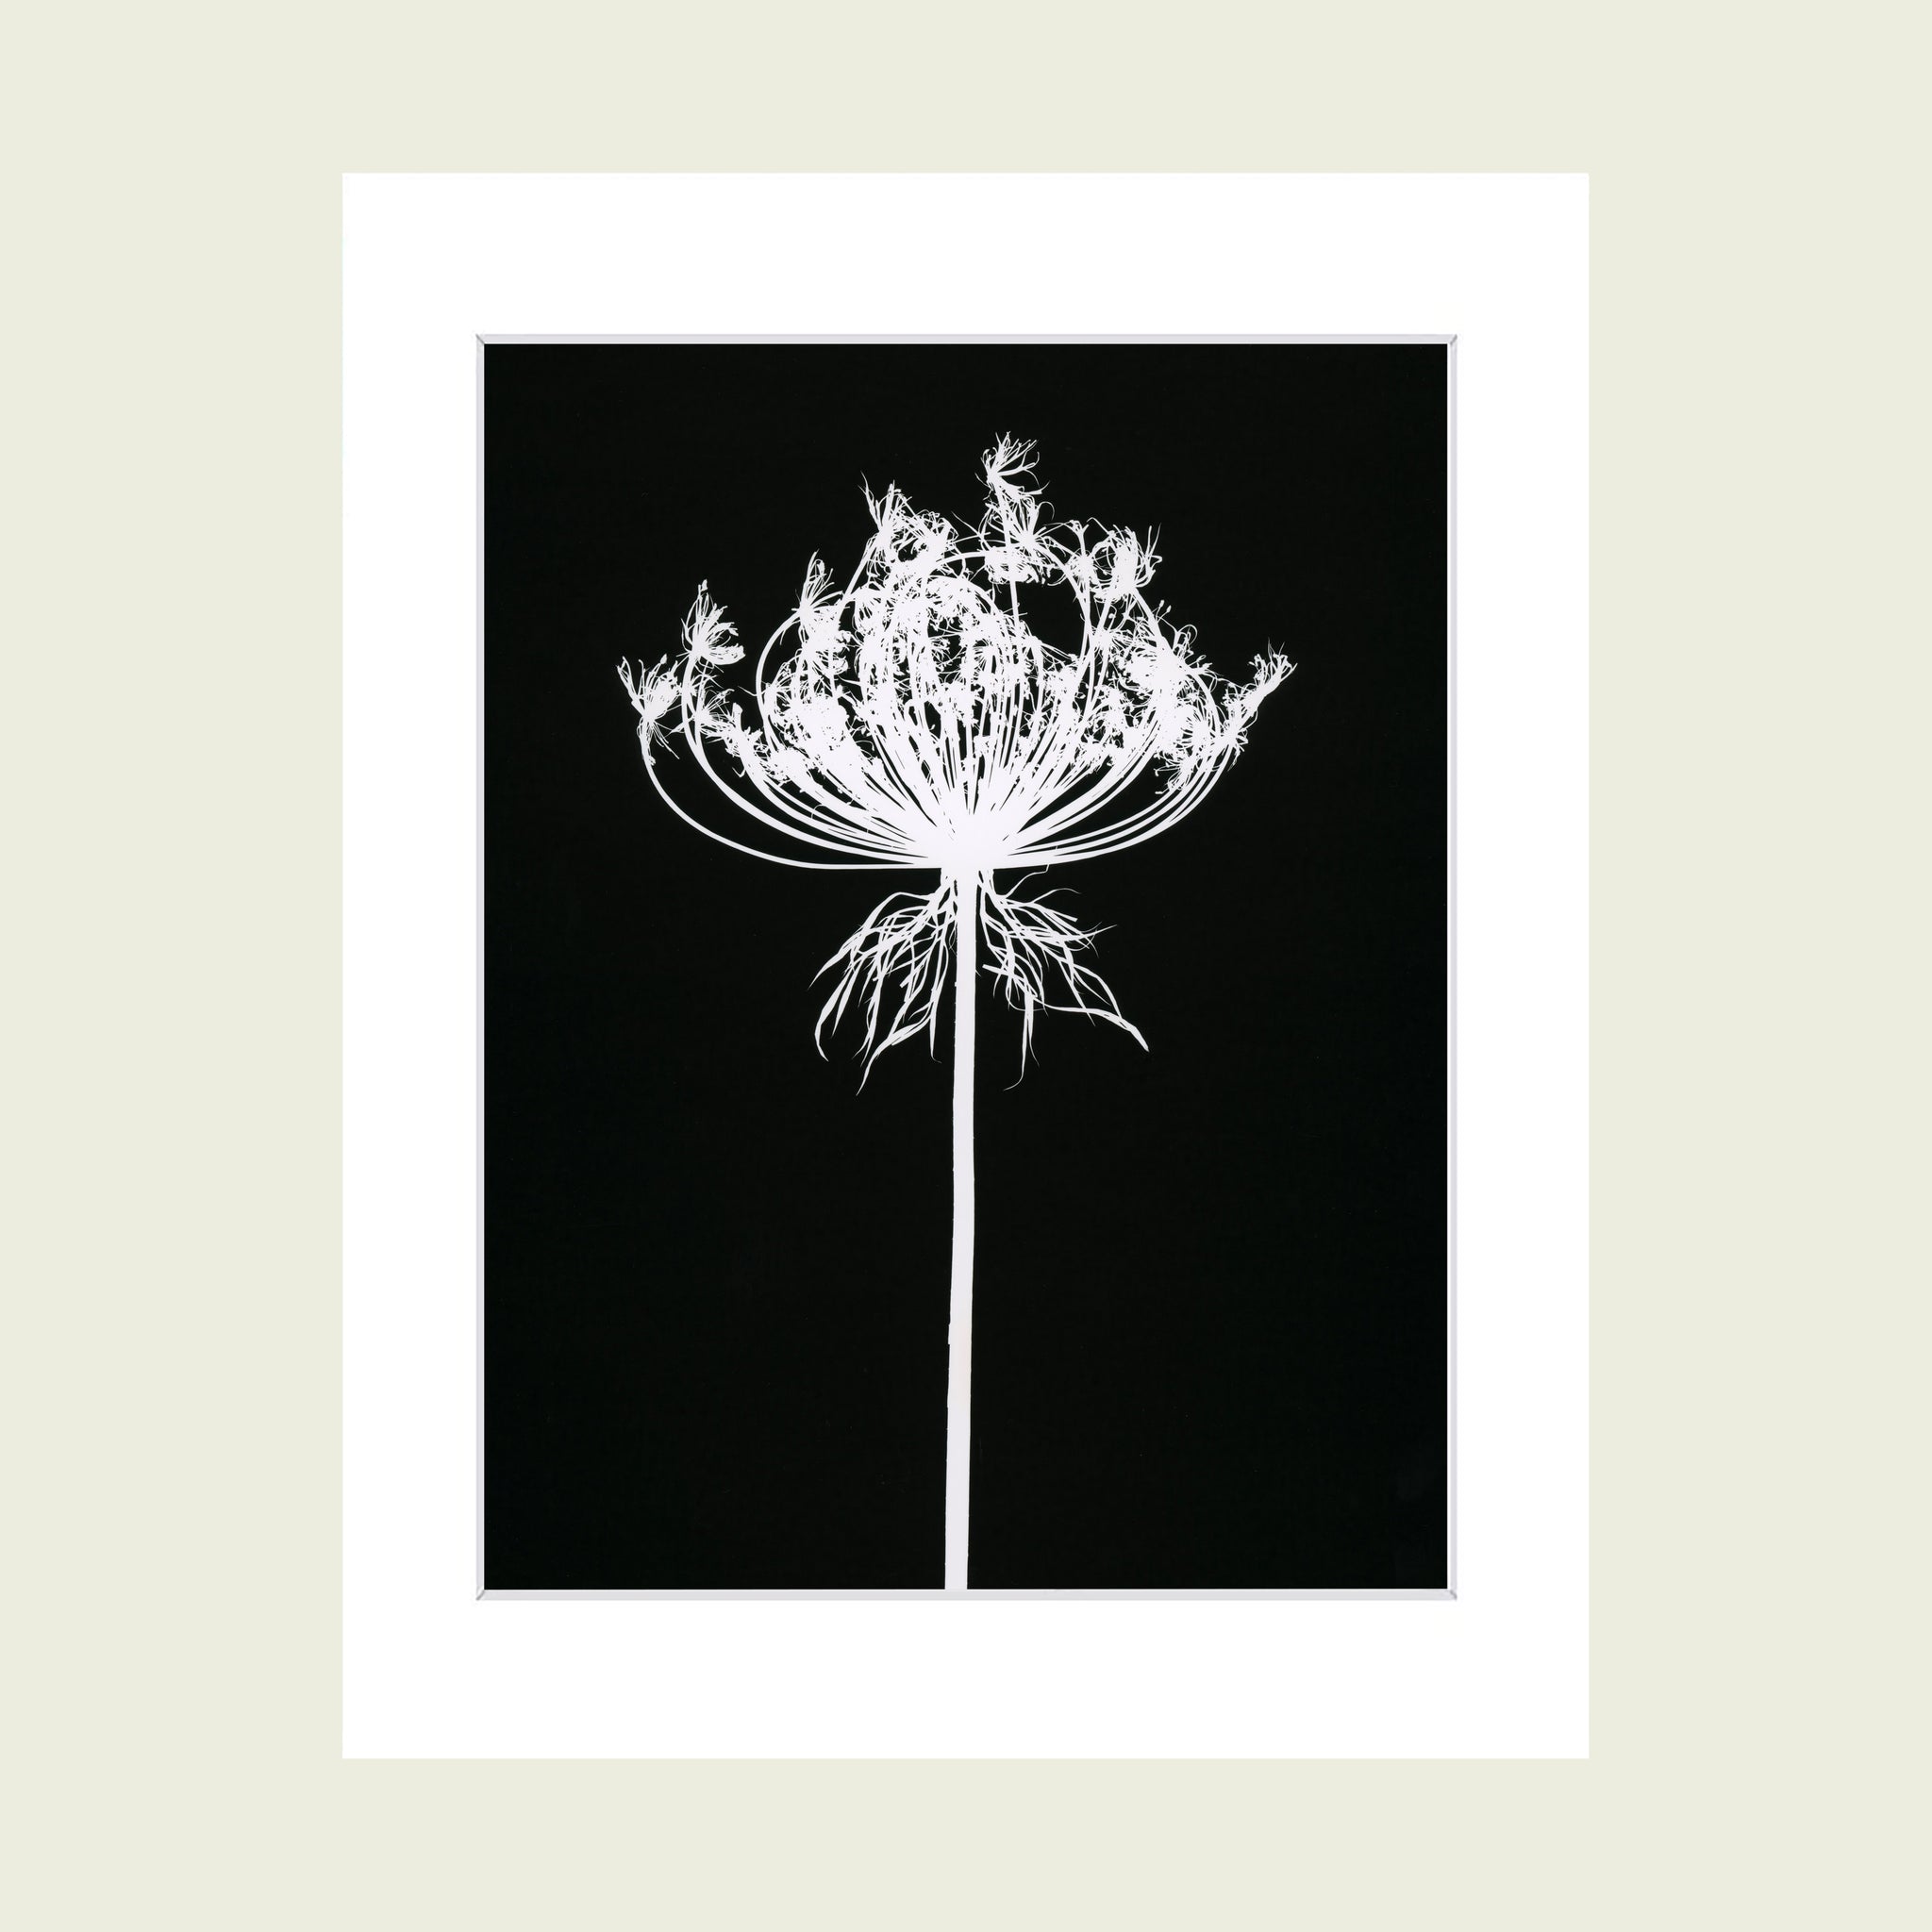 Black and white photogram silver gelatine art print for sale in white mat mount 